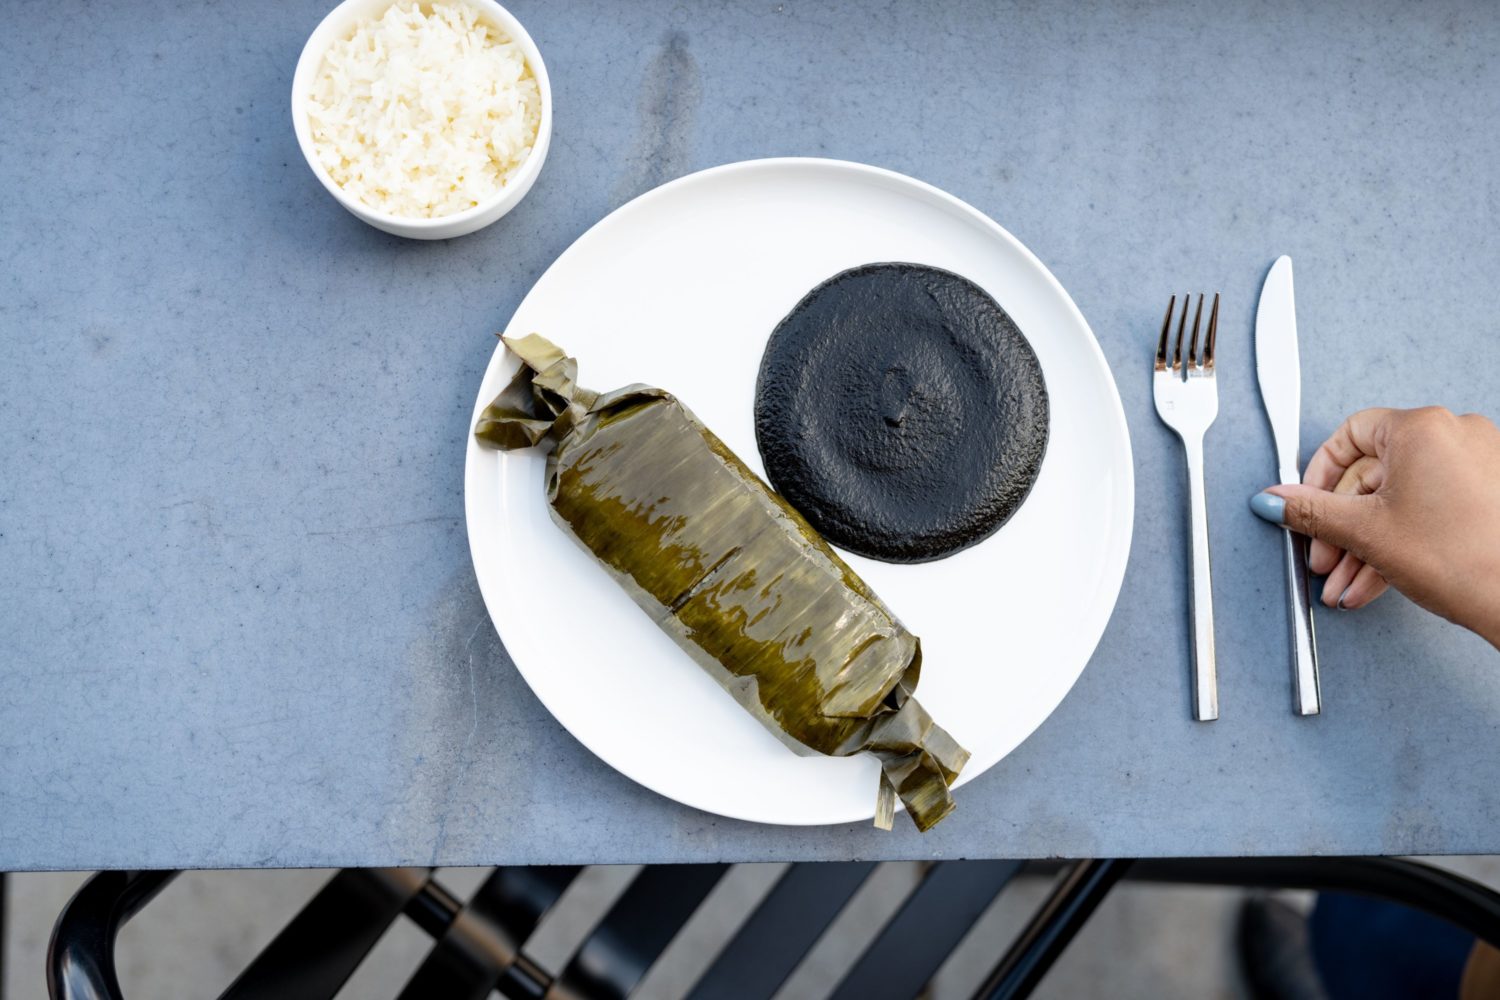 A braised beef tamales is paired with mole negro. Photo by Leah Judson.